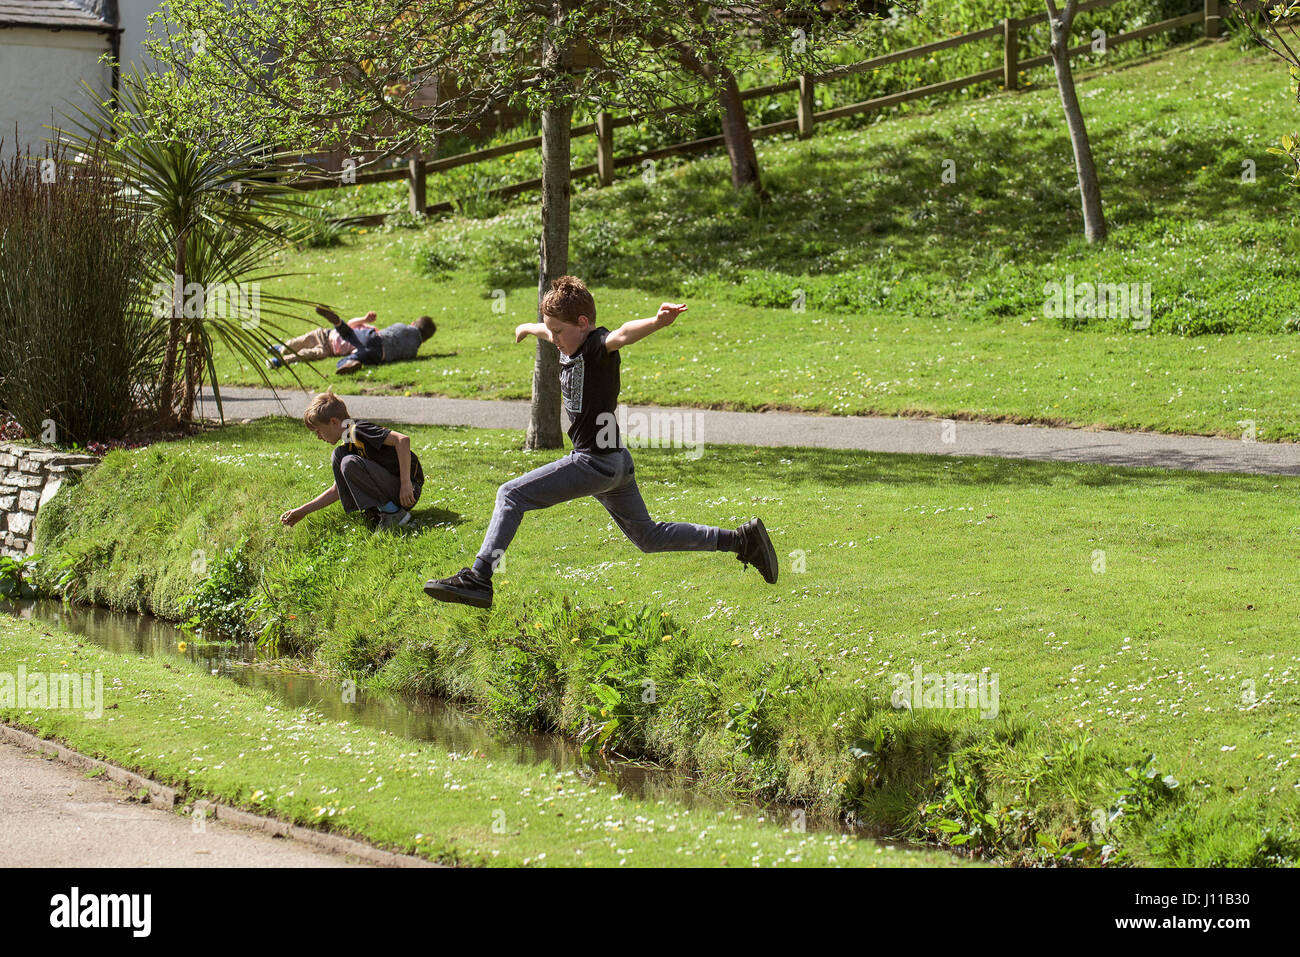 Boy Jumping over a stream Child Boys Playing Physical effort Energetic Energy Park Brook Childhood Adventure Challenge Stock Photo